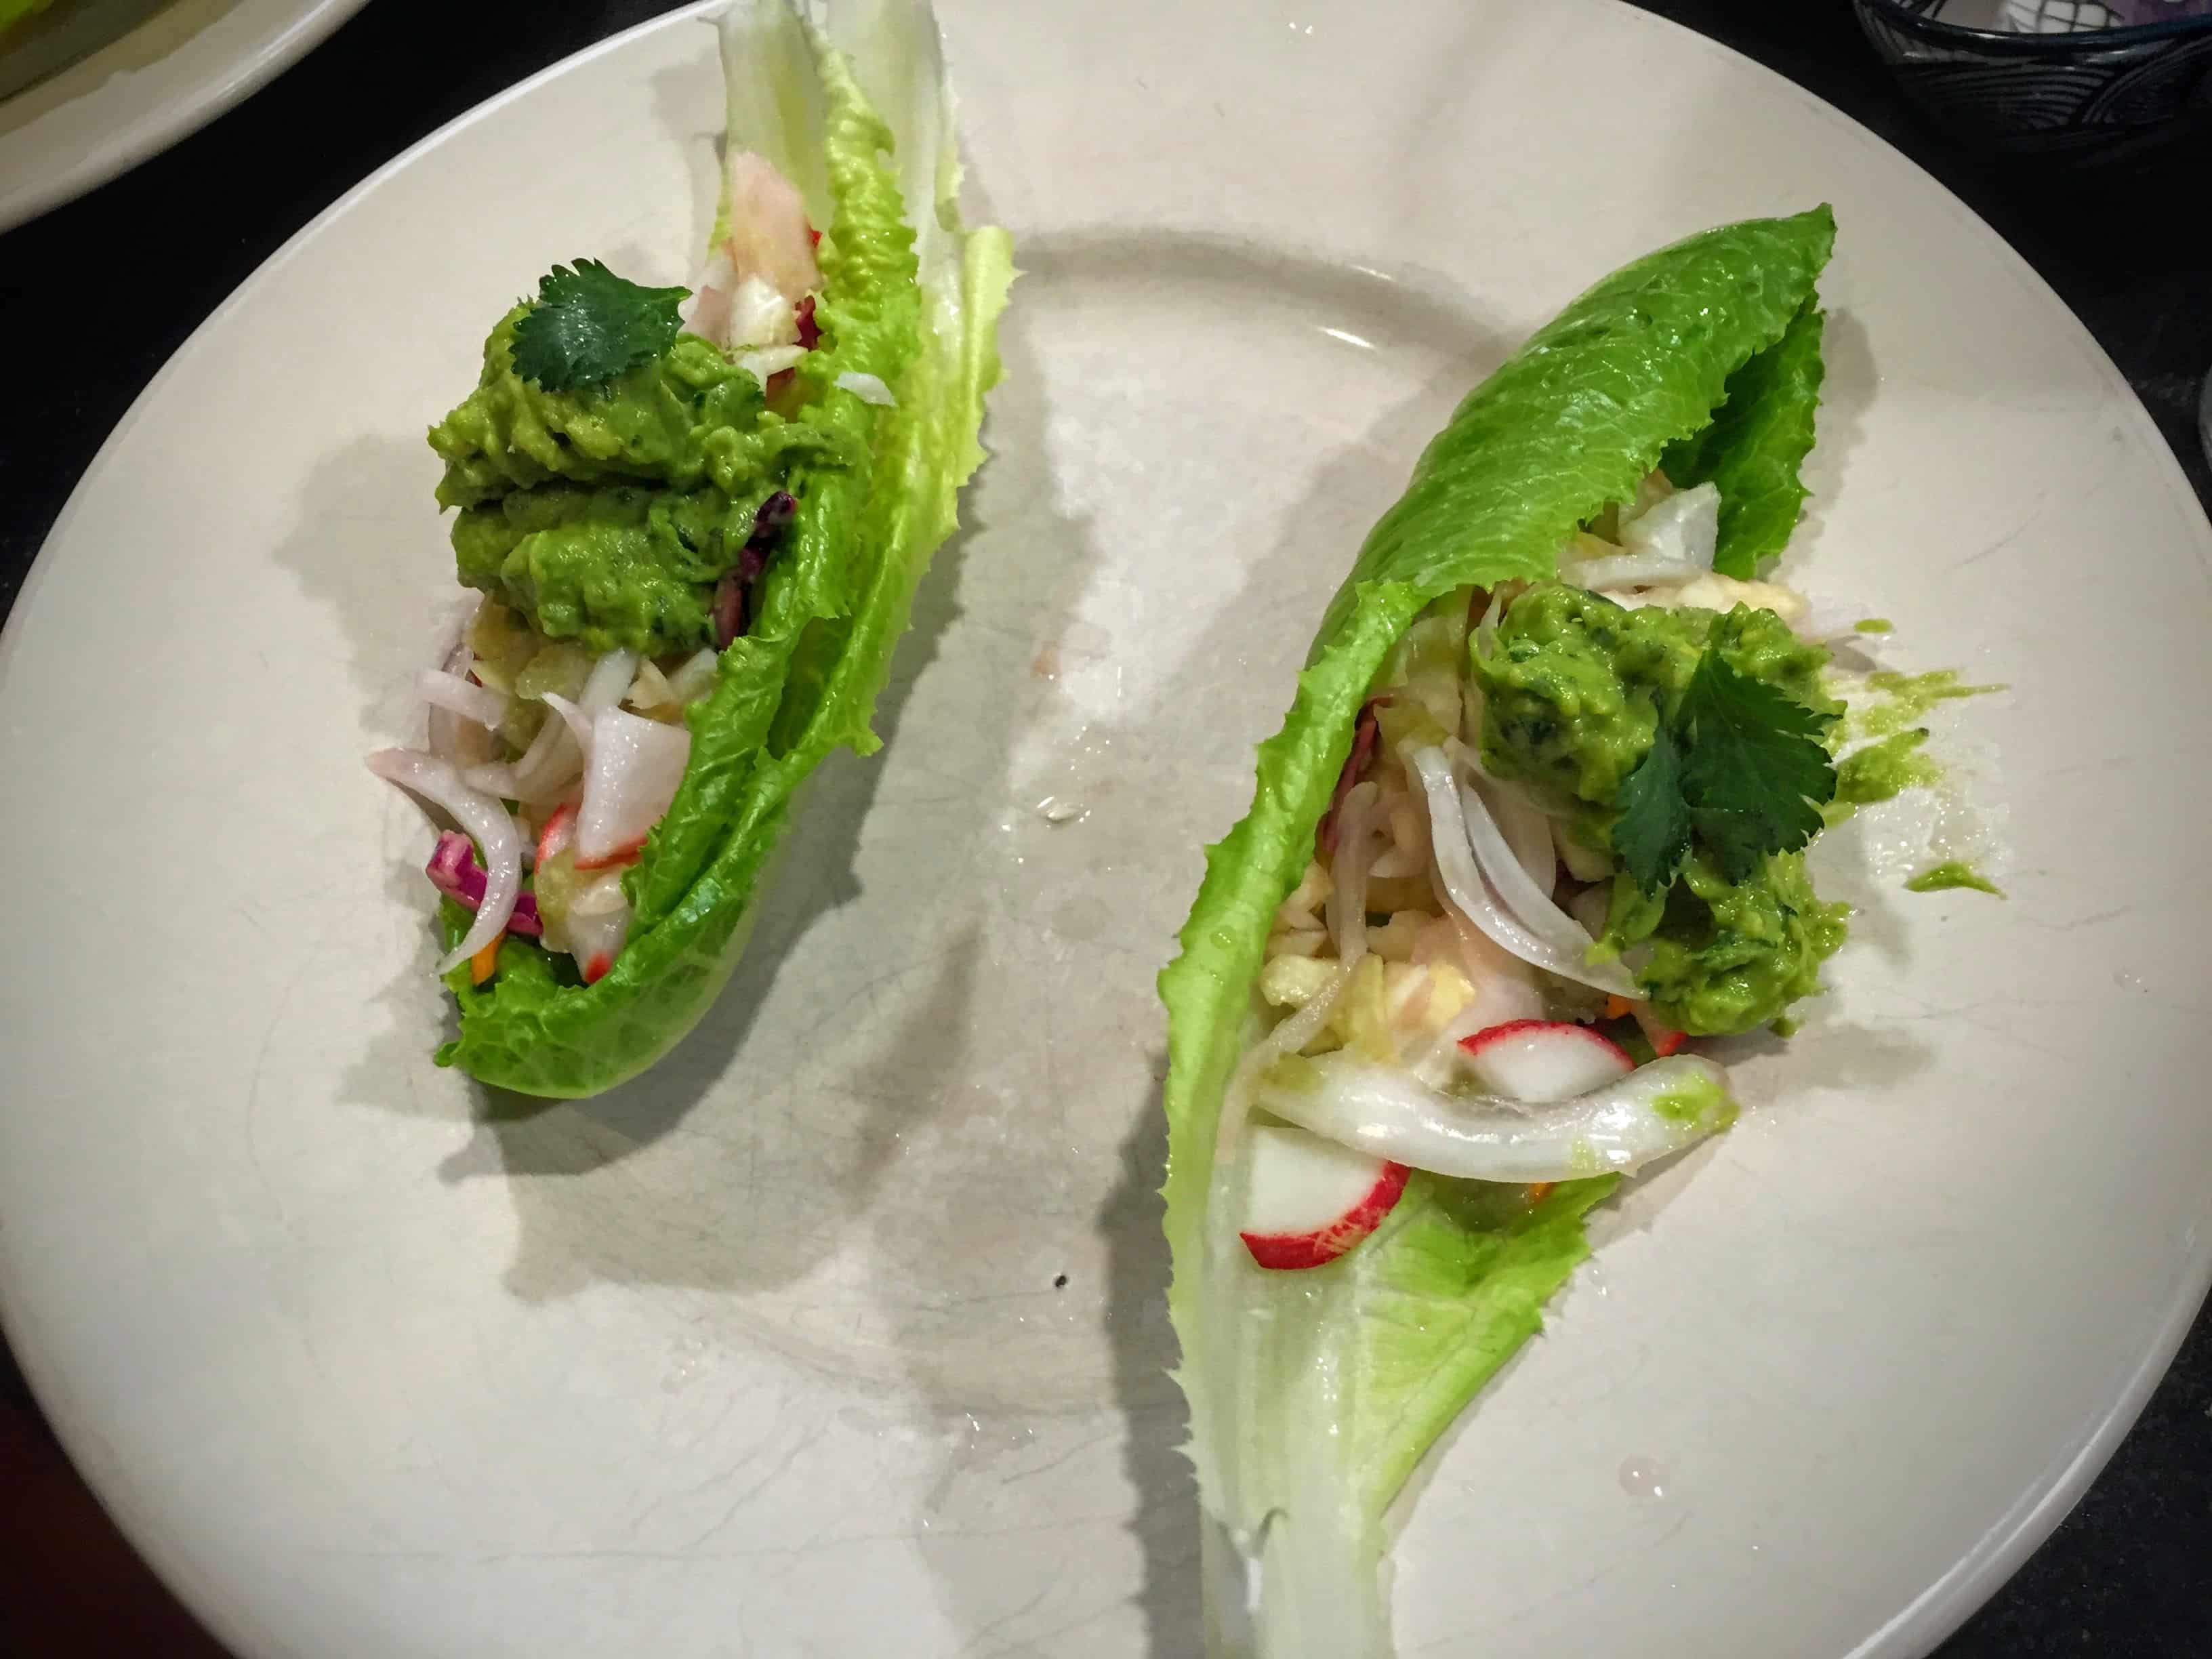 paleo_lettuce_wrapped_cod_fish_tacos_with_cumin_gucamole_and_radish_slaw_from_mypaleos_healthy_no_meat_lime_juice